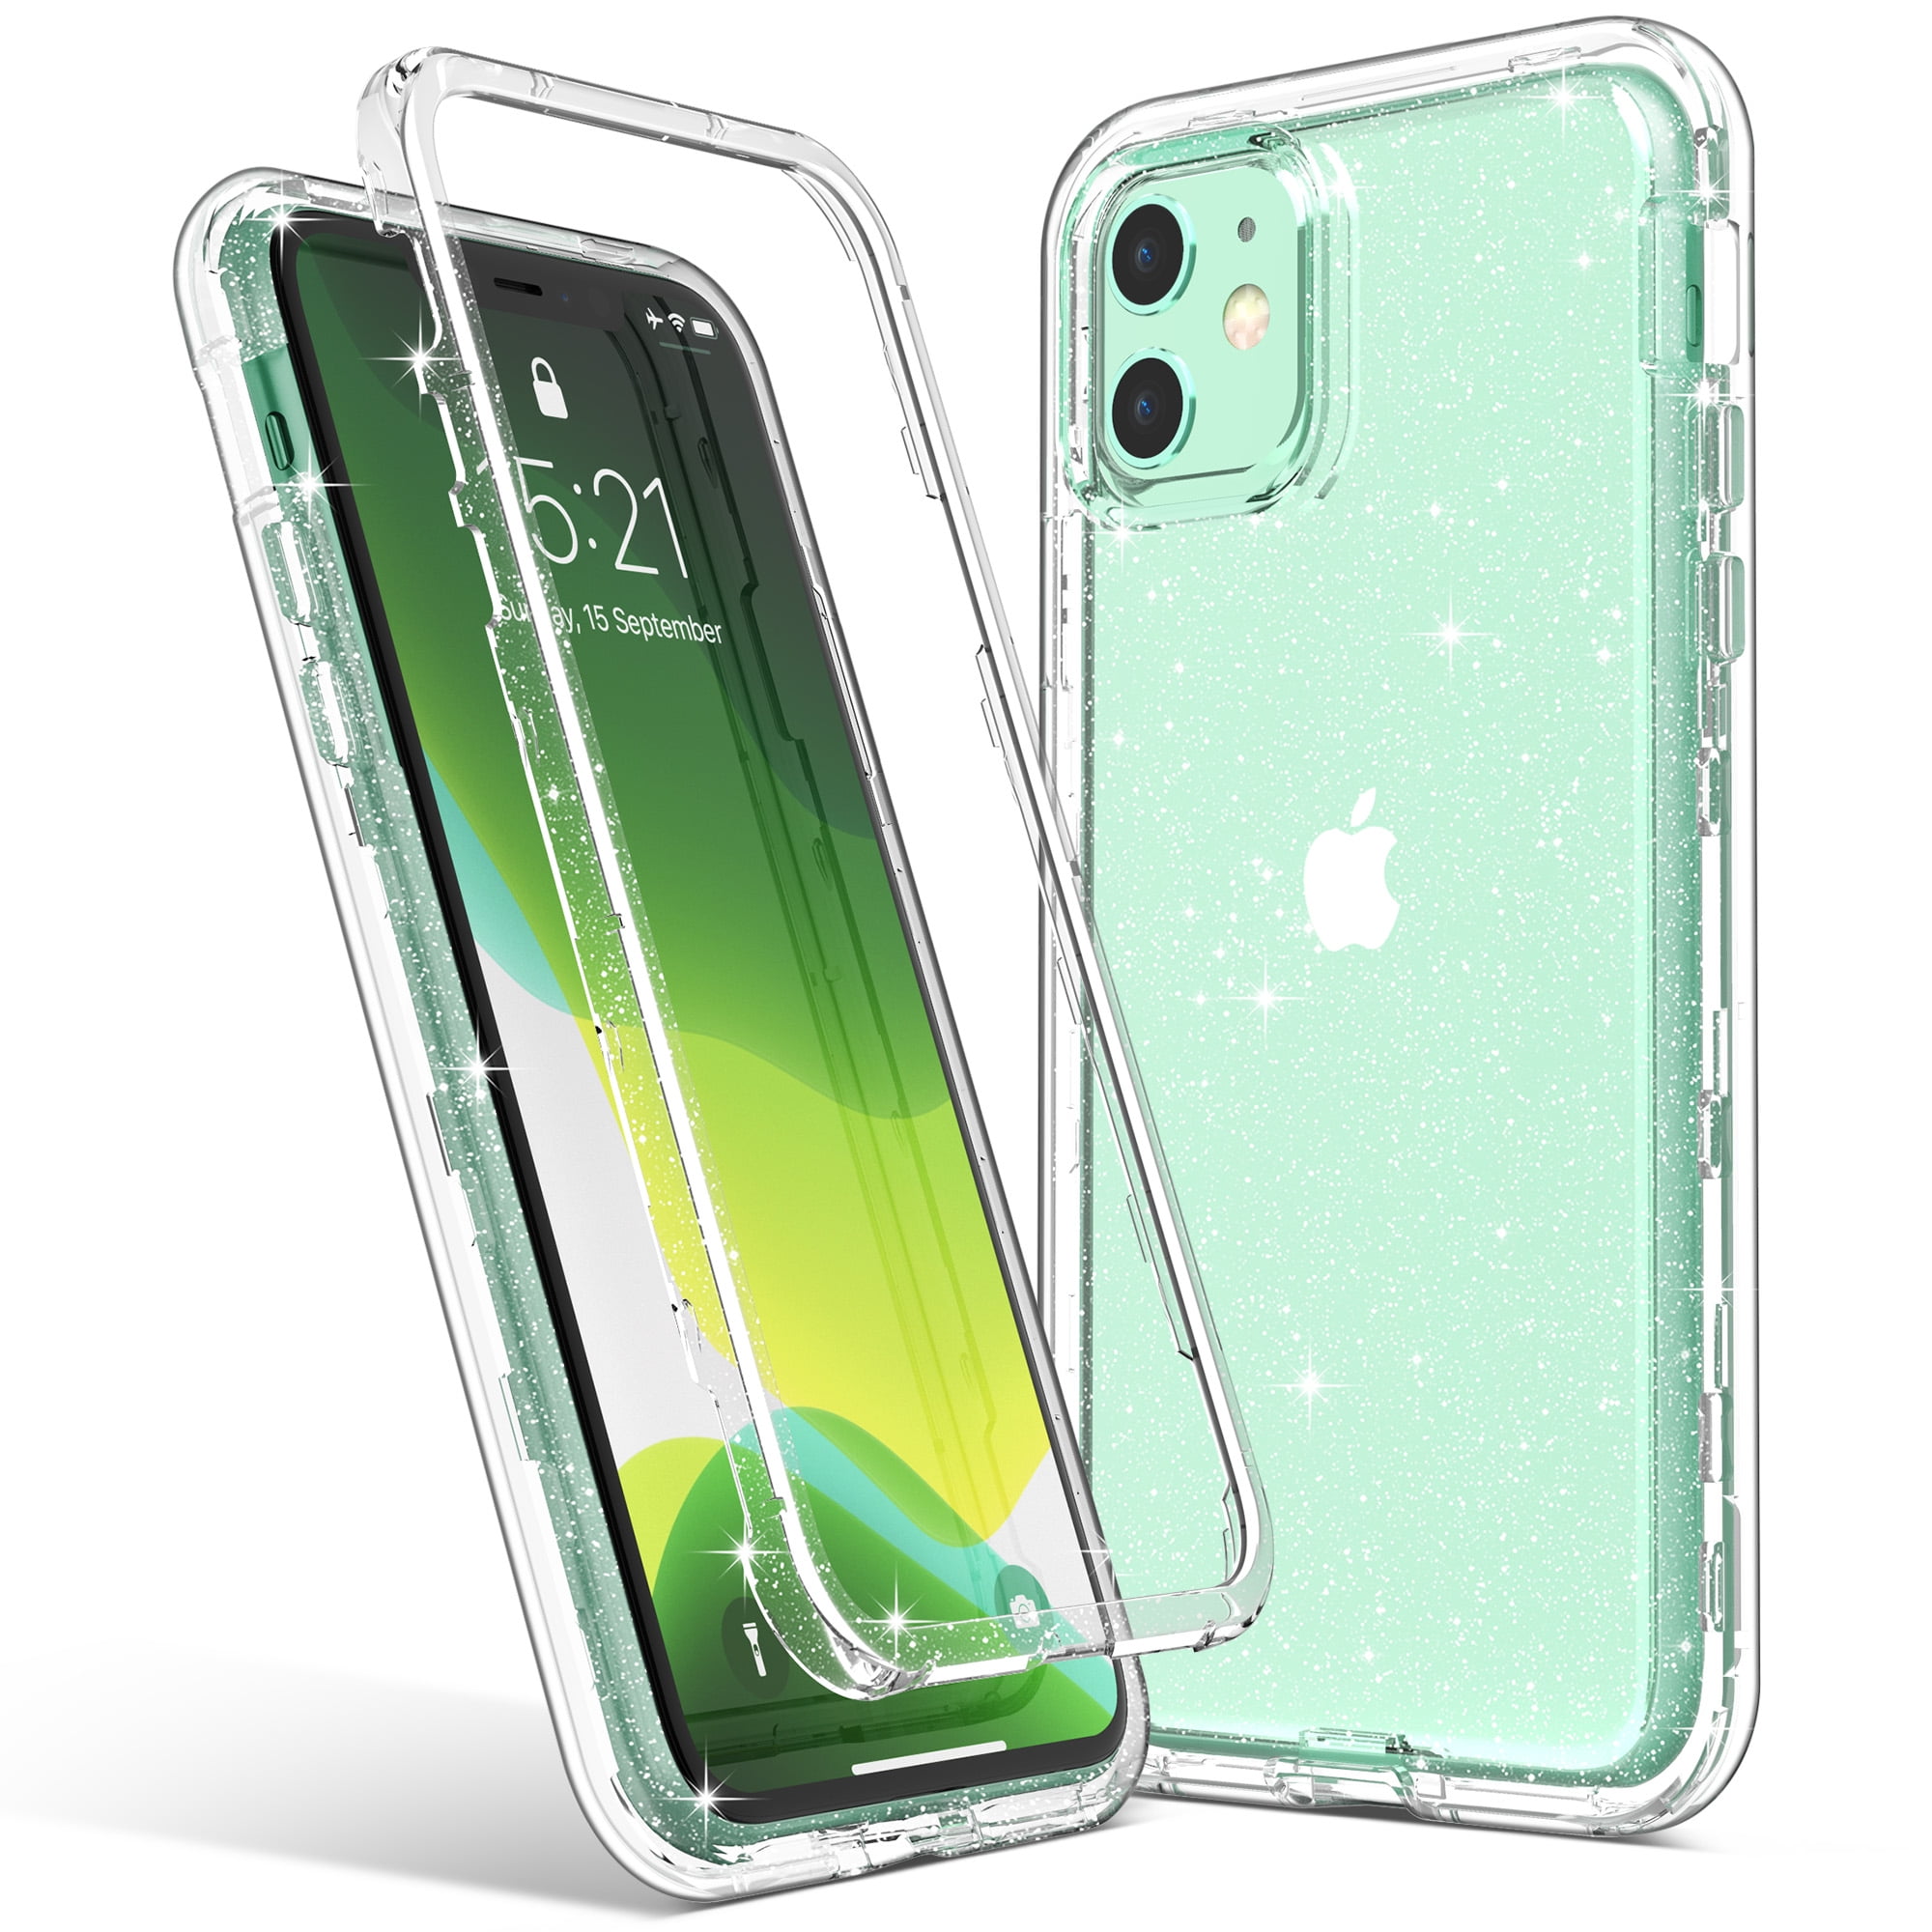 Team Luxury Designed for iPhone 11 Case, Ultra Impact Resist Anti-Scratch Shockproof Protective Case for iPhone 11 Phone Case Cover 6.1, Mint Gre